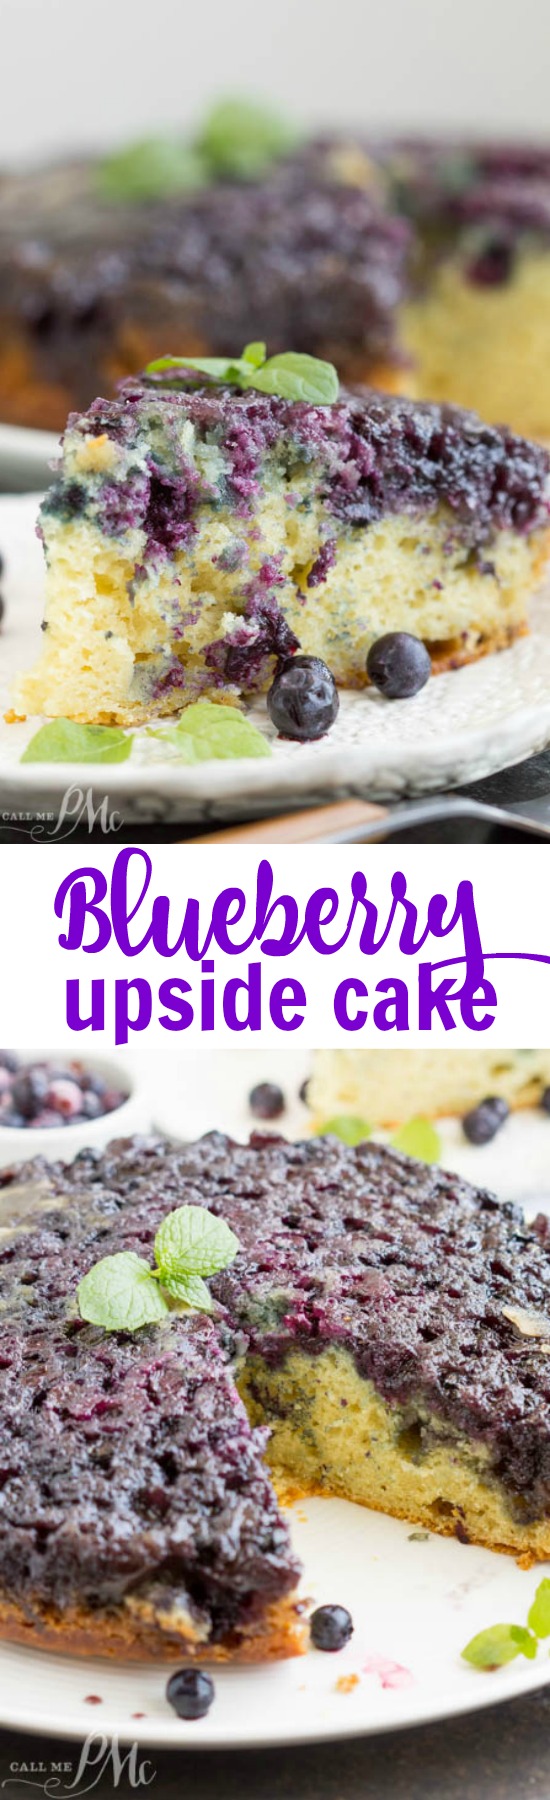 Homemade Blueberry Upside-down Cake is unbelievably good. Blueberries and a caramel glaze ooze down into the tender yellow cake making it moist and decadent. This cake recipe has quickly become one of my all-time favorites!